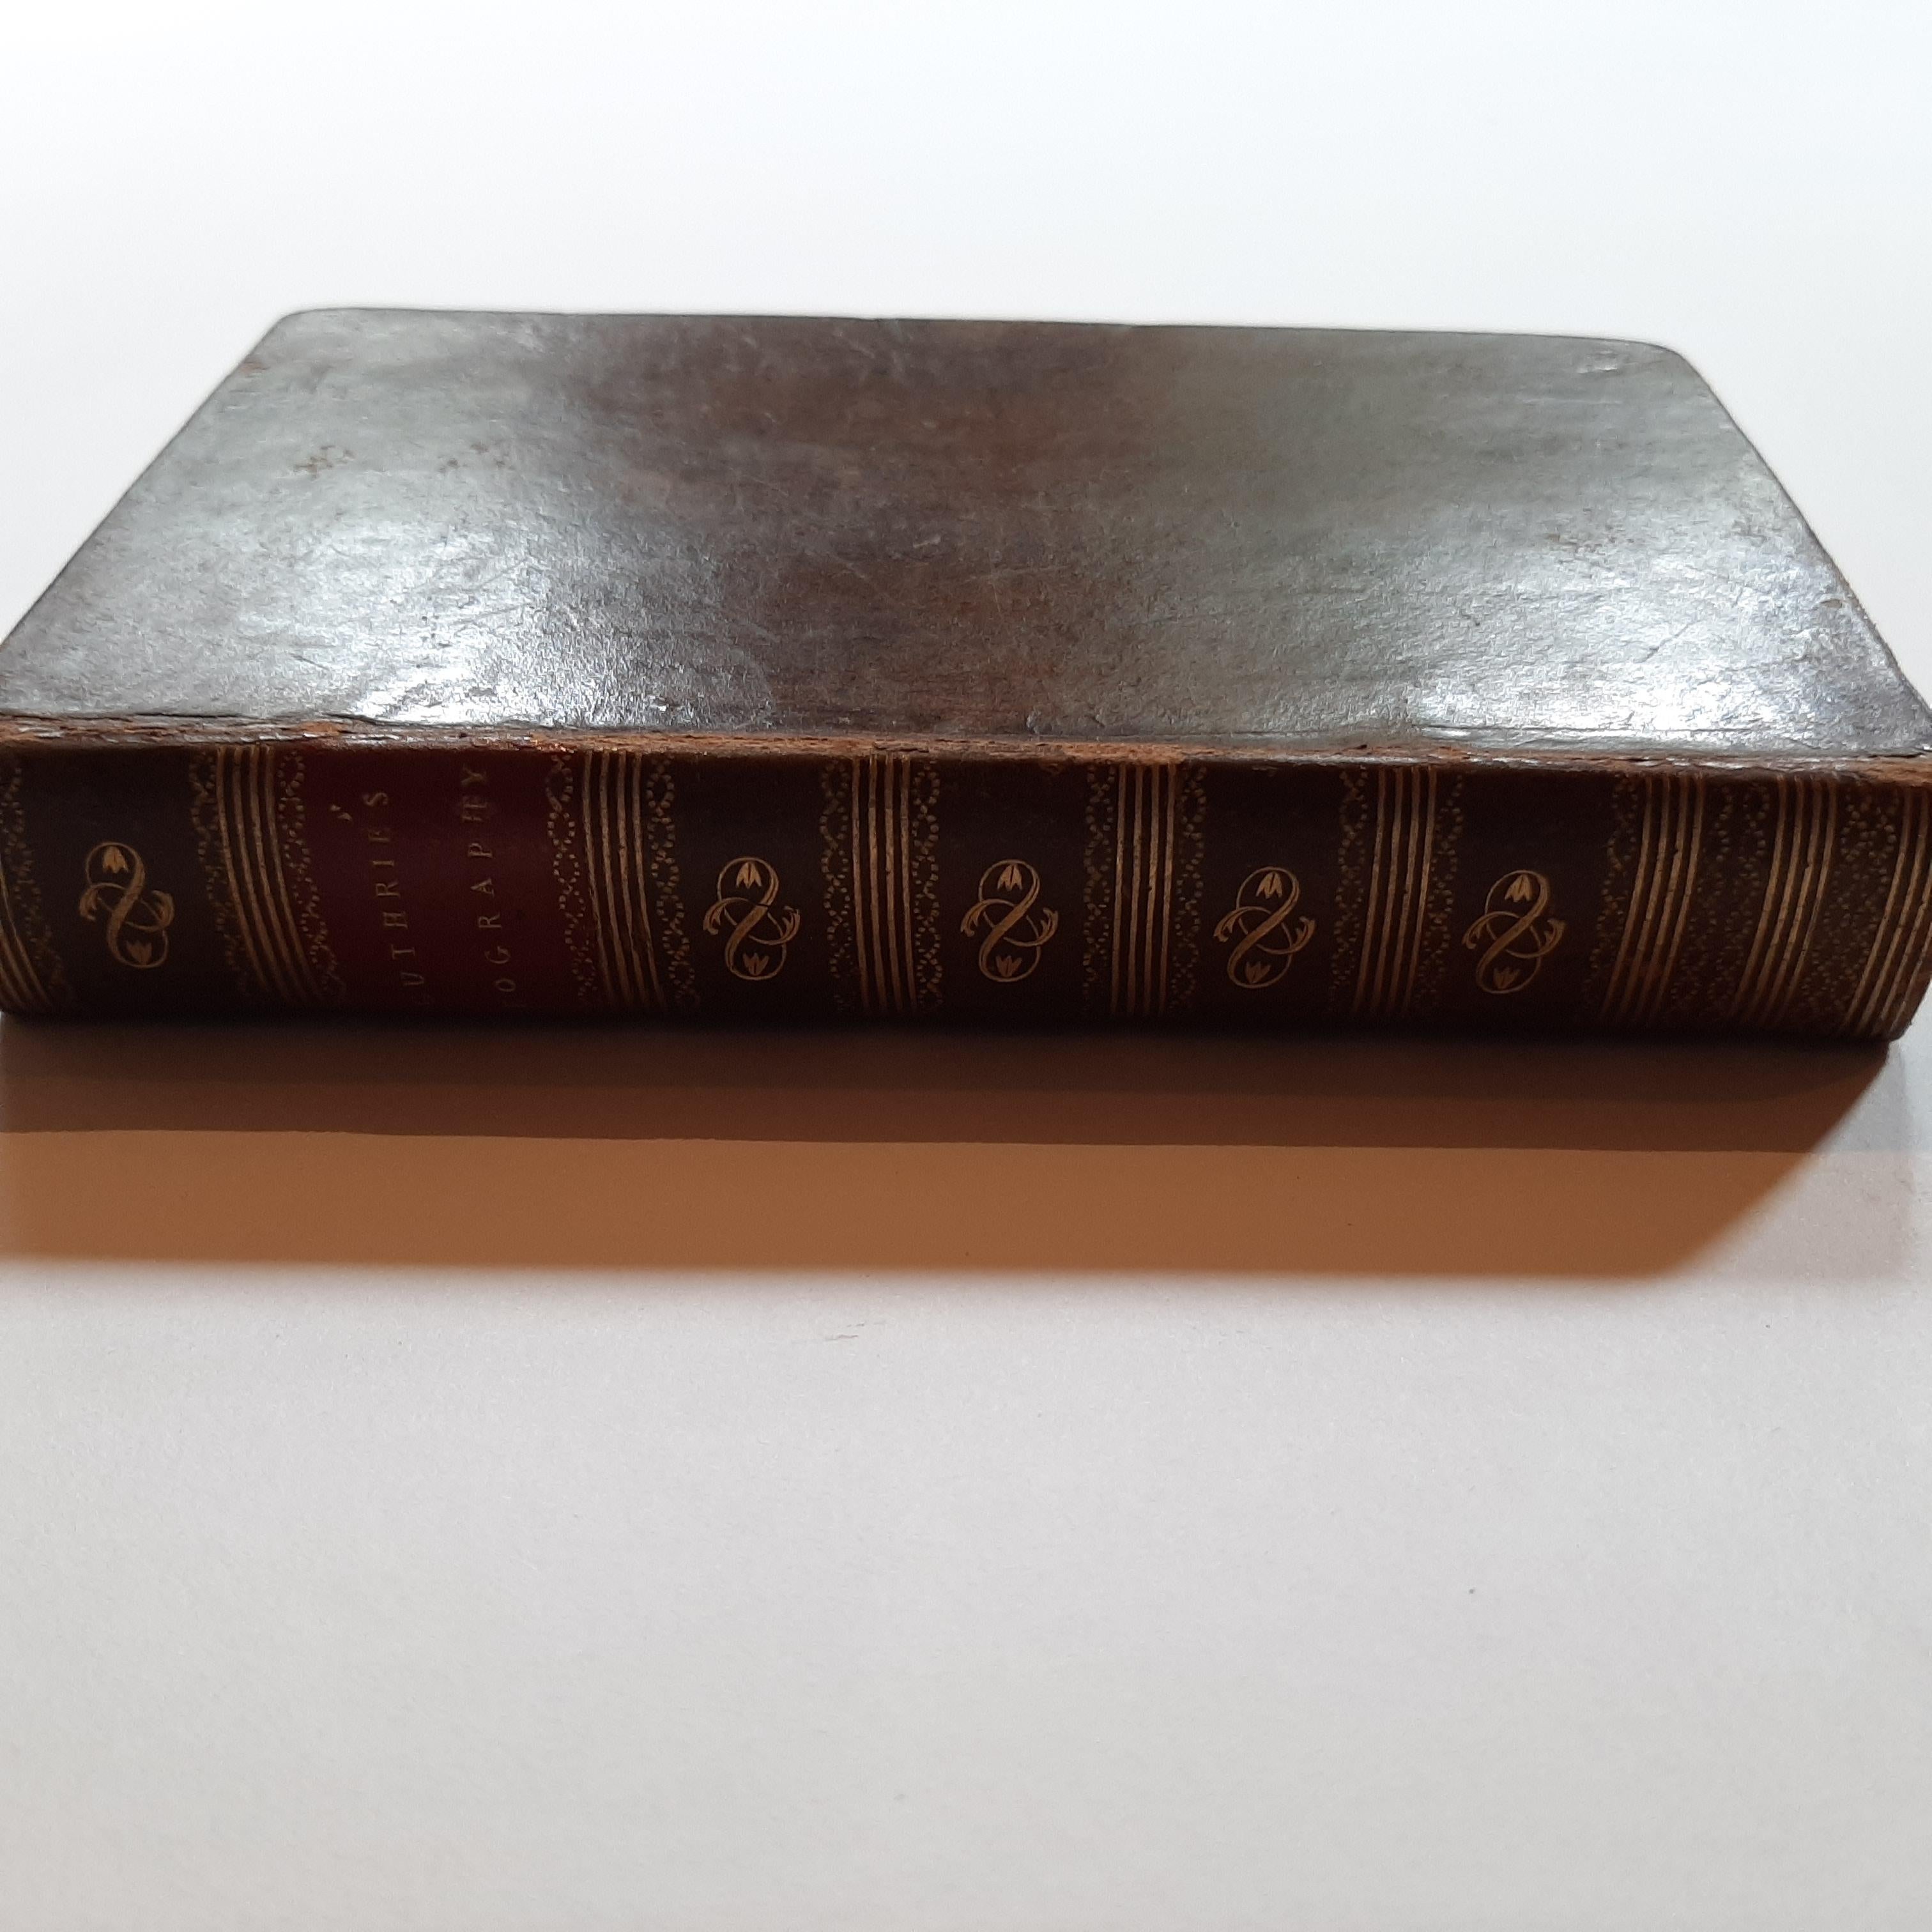 First edition of 'Guthrie's Geographical Grammar in Miniature'. 358 p. 13 fold. engr. maps, contemp. calf. Gilt spine. sm. 8vo. Upper hinge showing but strong; old bookplate 